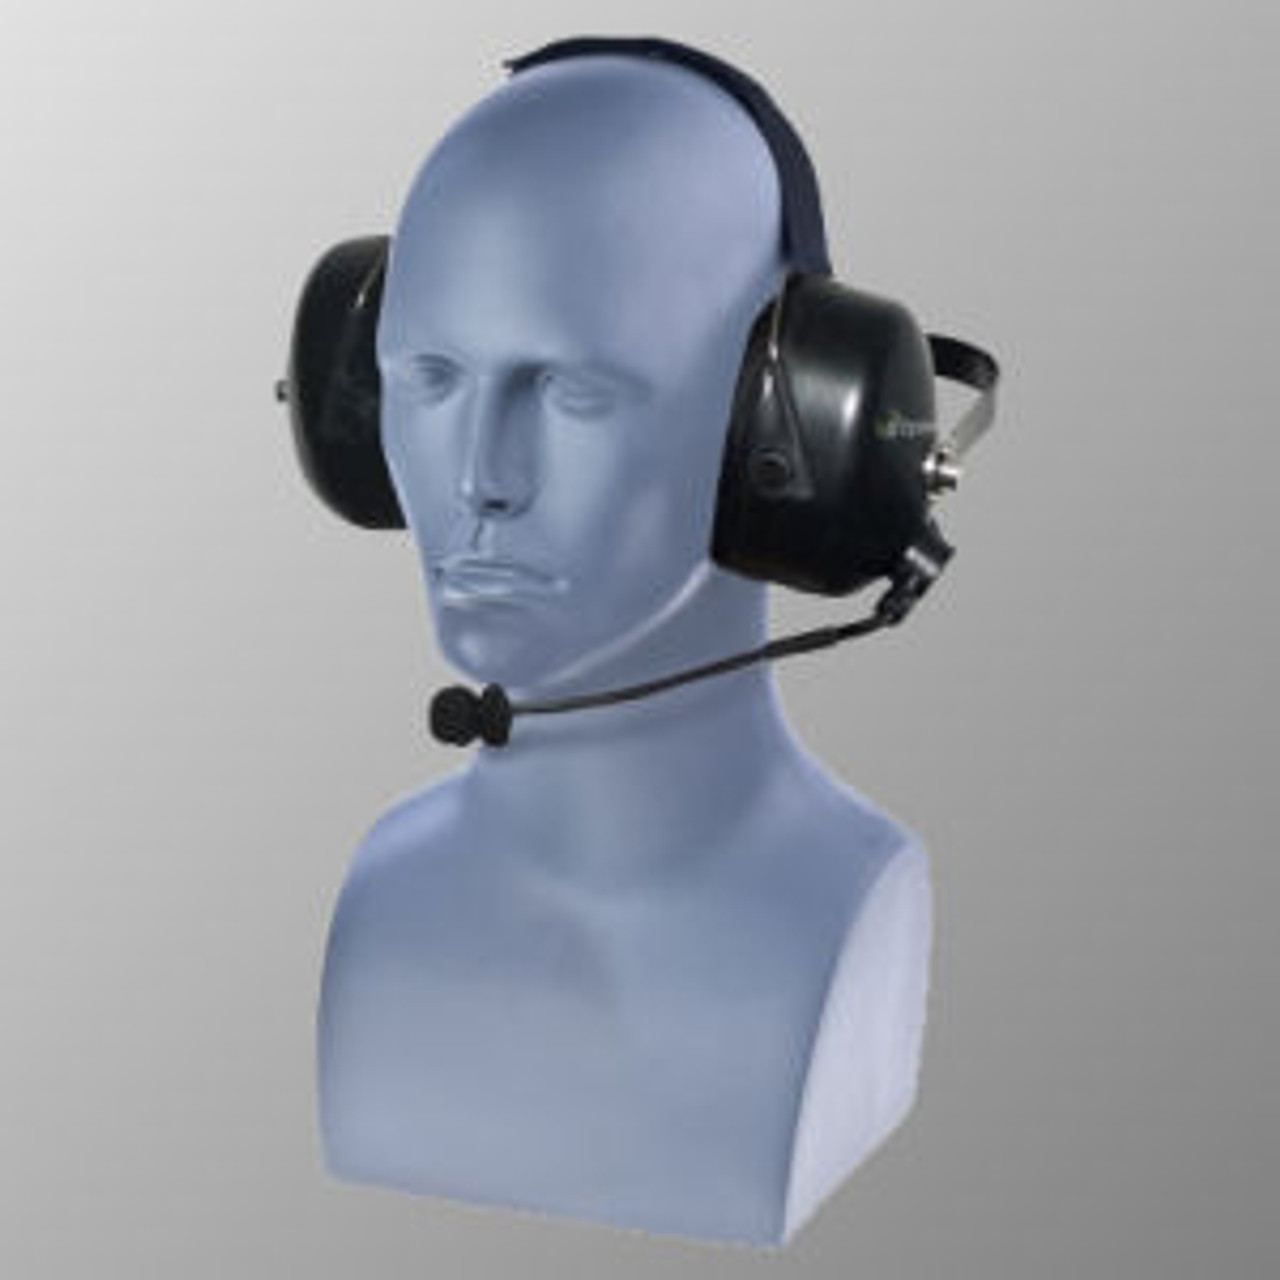 HYT / Hytera Z1p Noise Canceling Double Muff Behind The Head Headset